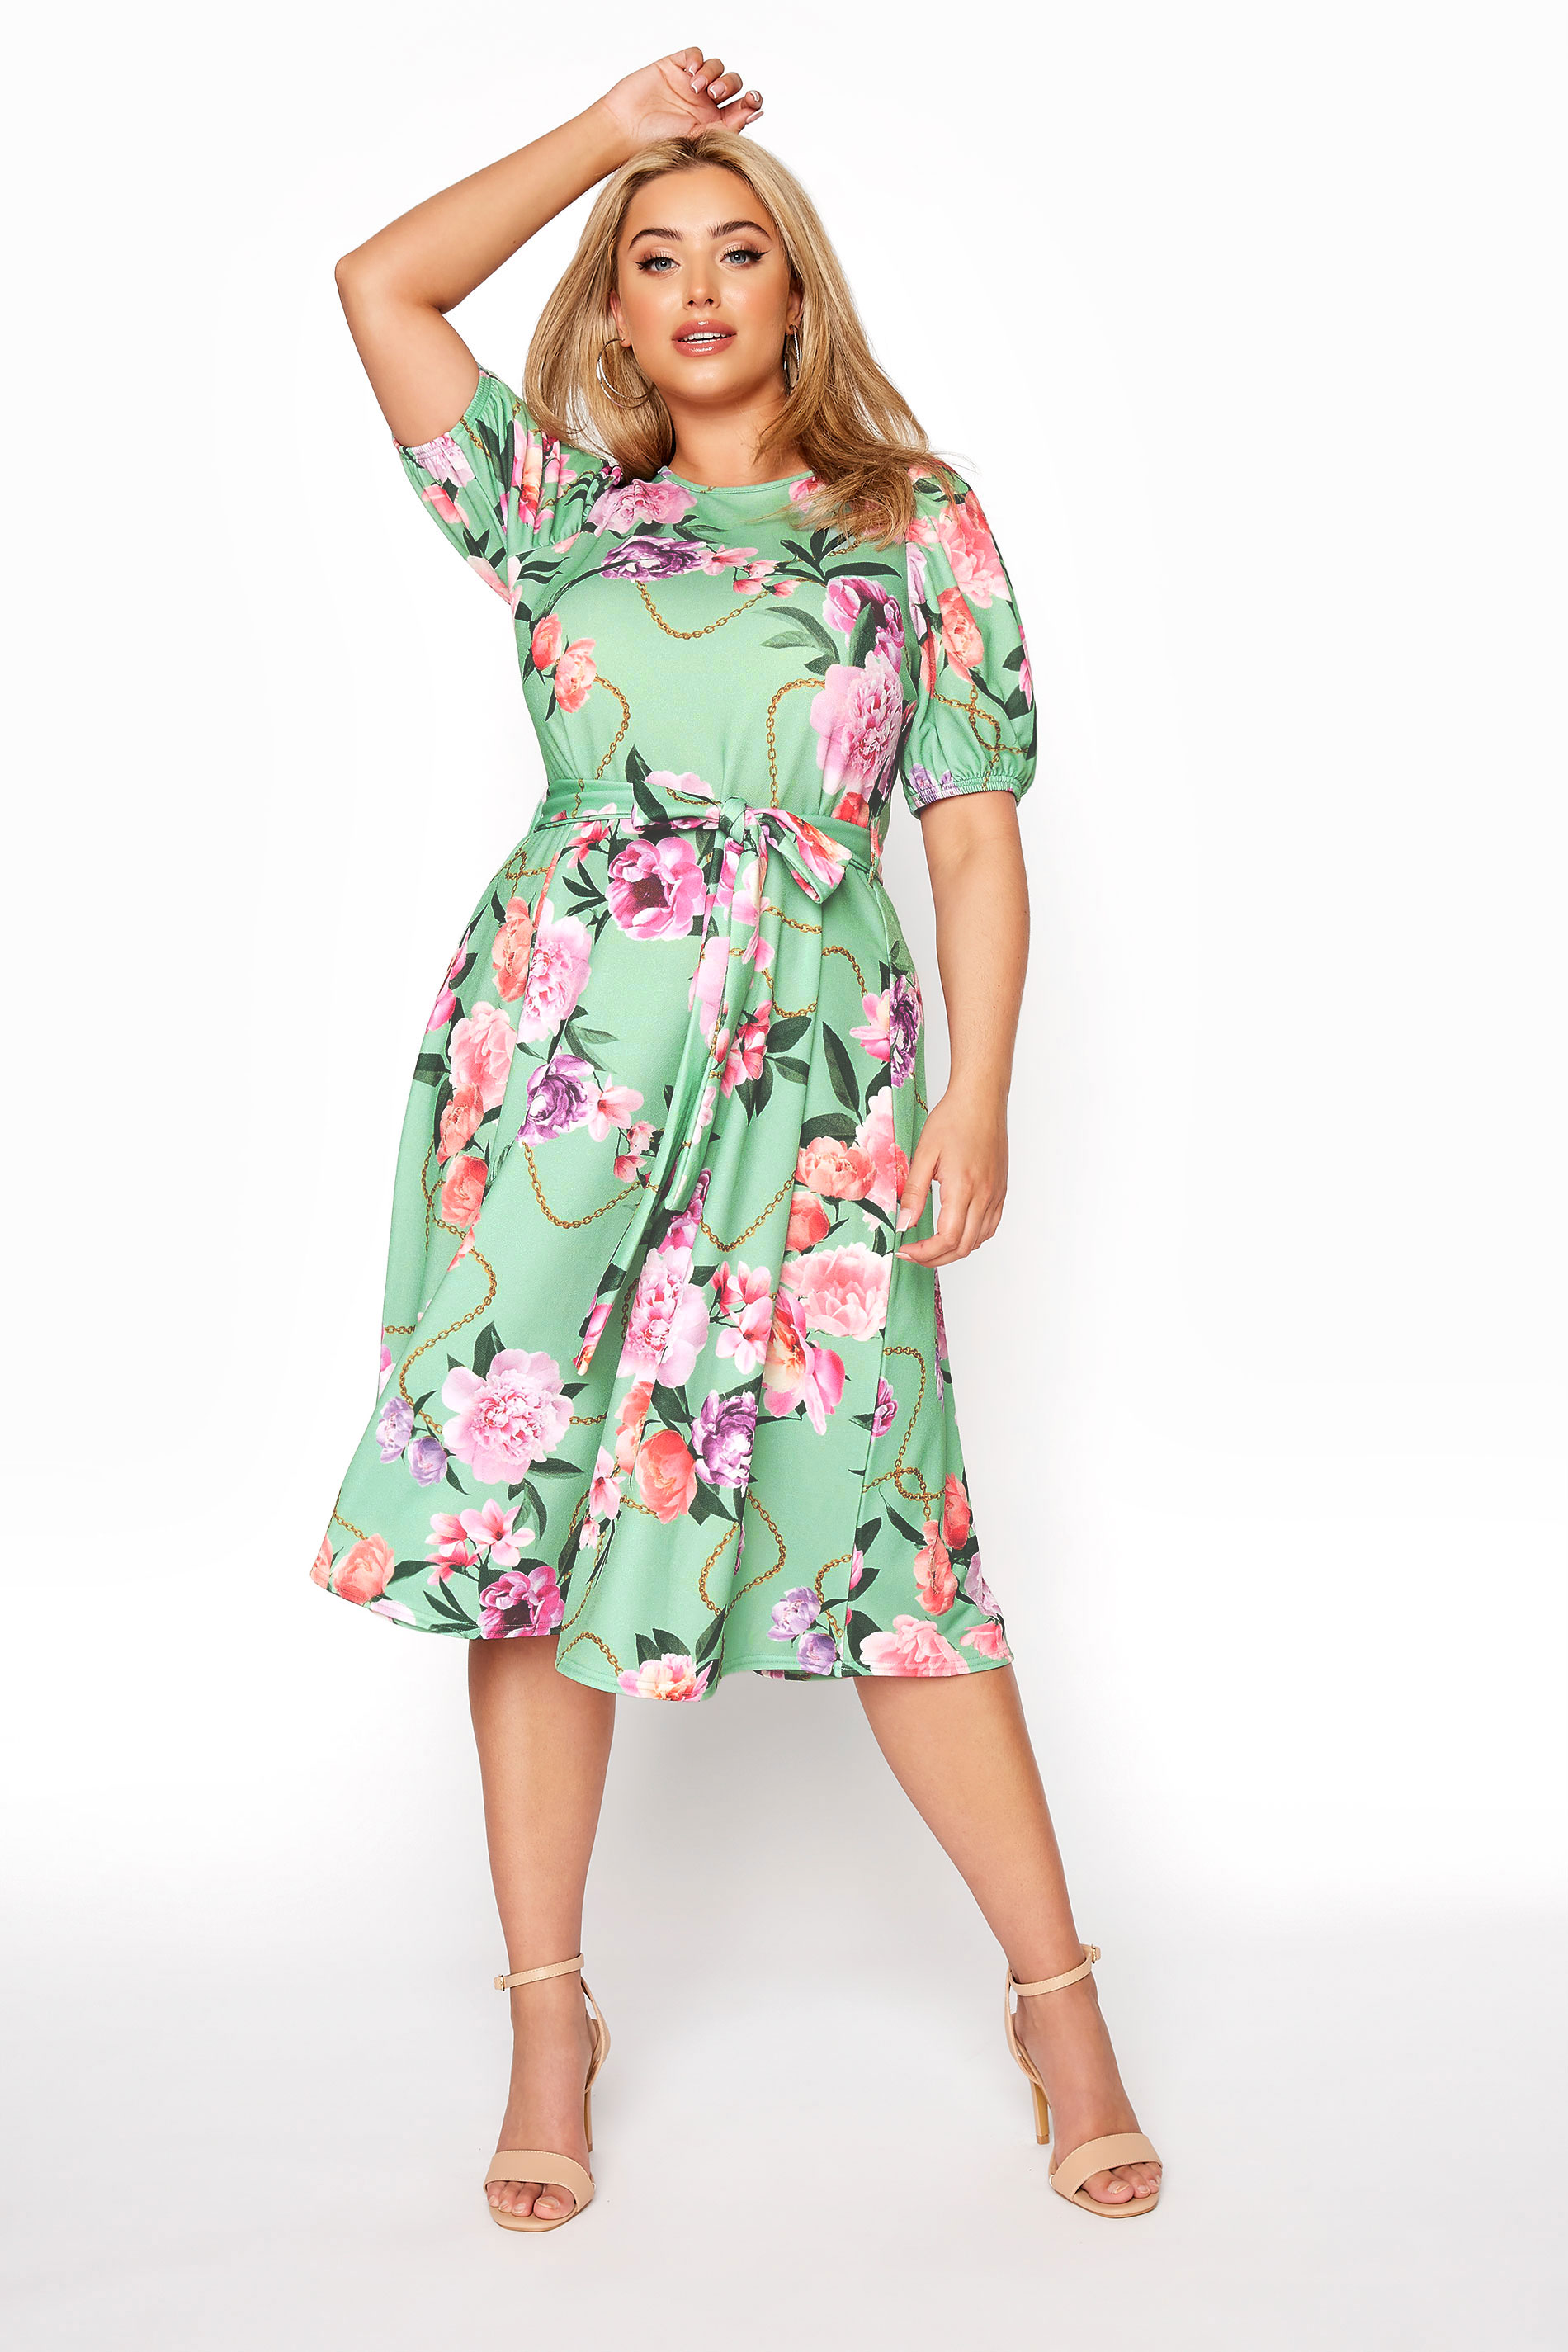 Robes Grande Taille Grande taille  Robes Patineuses | YOURS LONDON - Robe Verte Floral Manches Bouffantes - YL62274